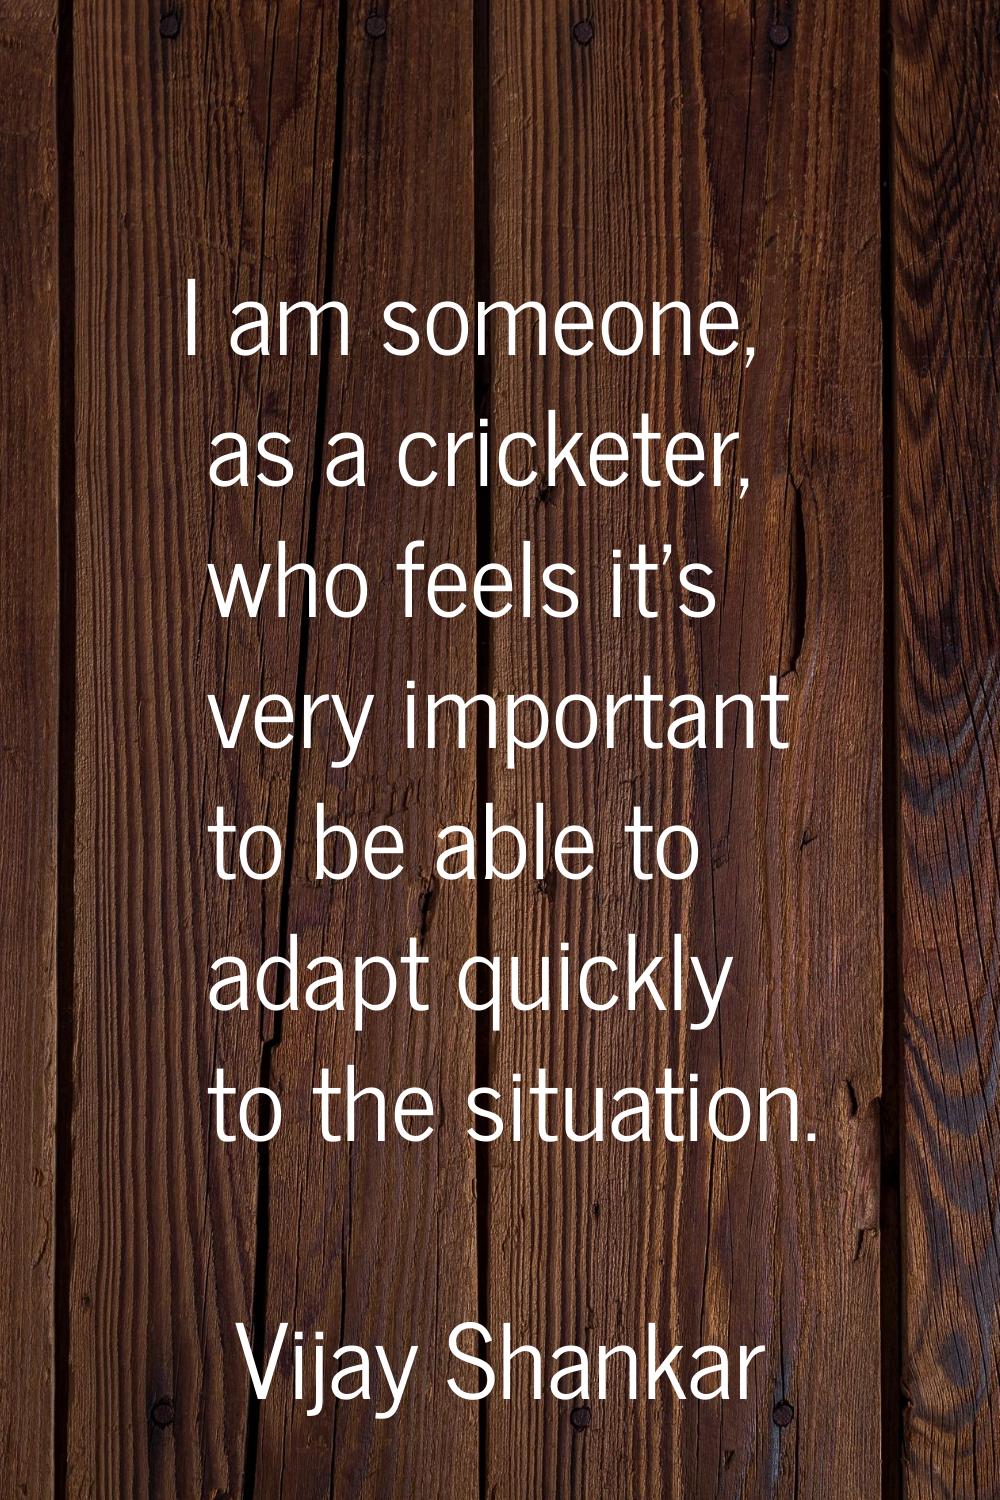 I am someone, as a cricketer, who feels it's very important to be able to adapt quickly to the situ